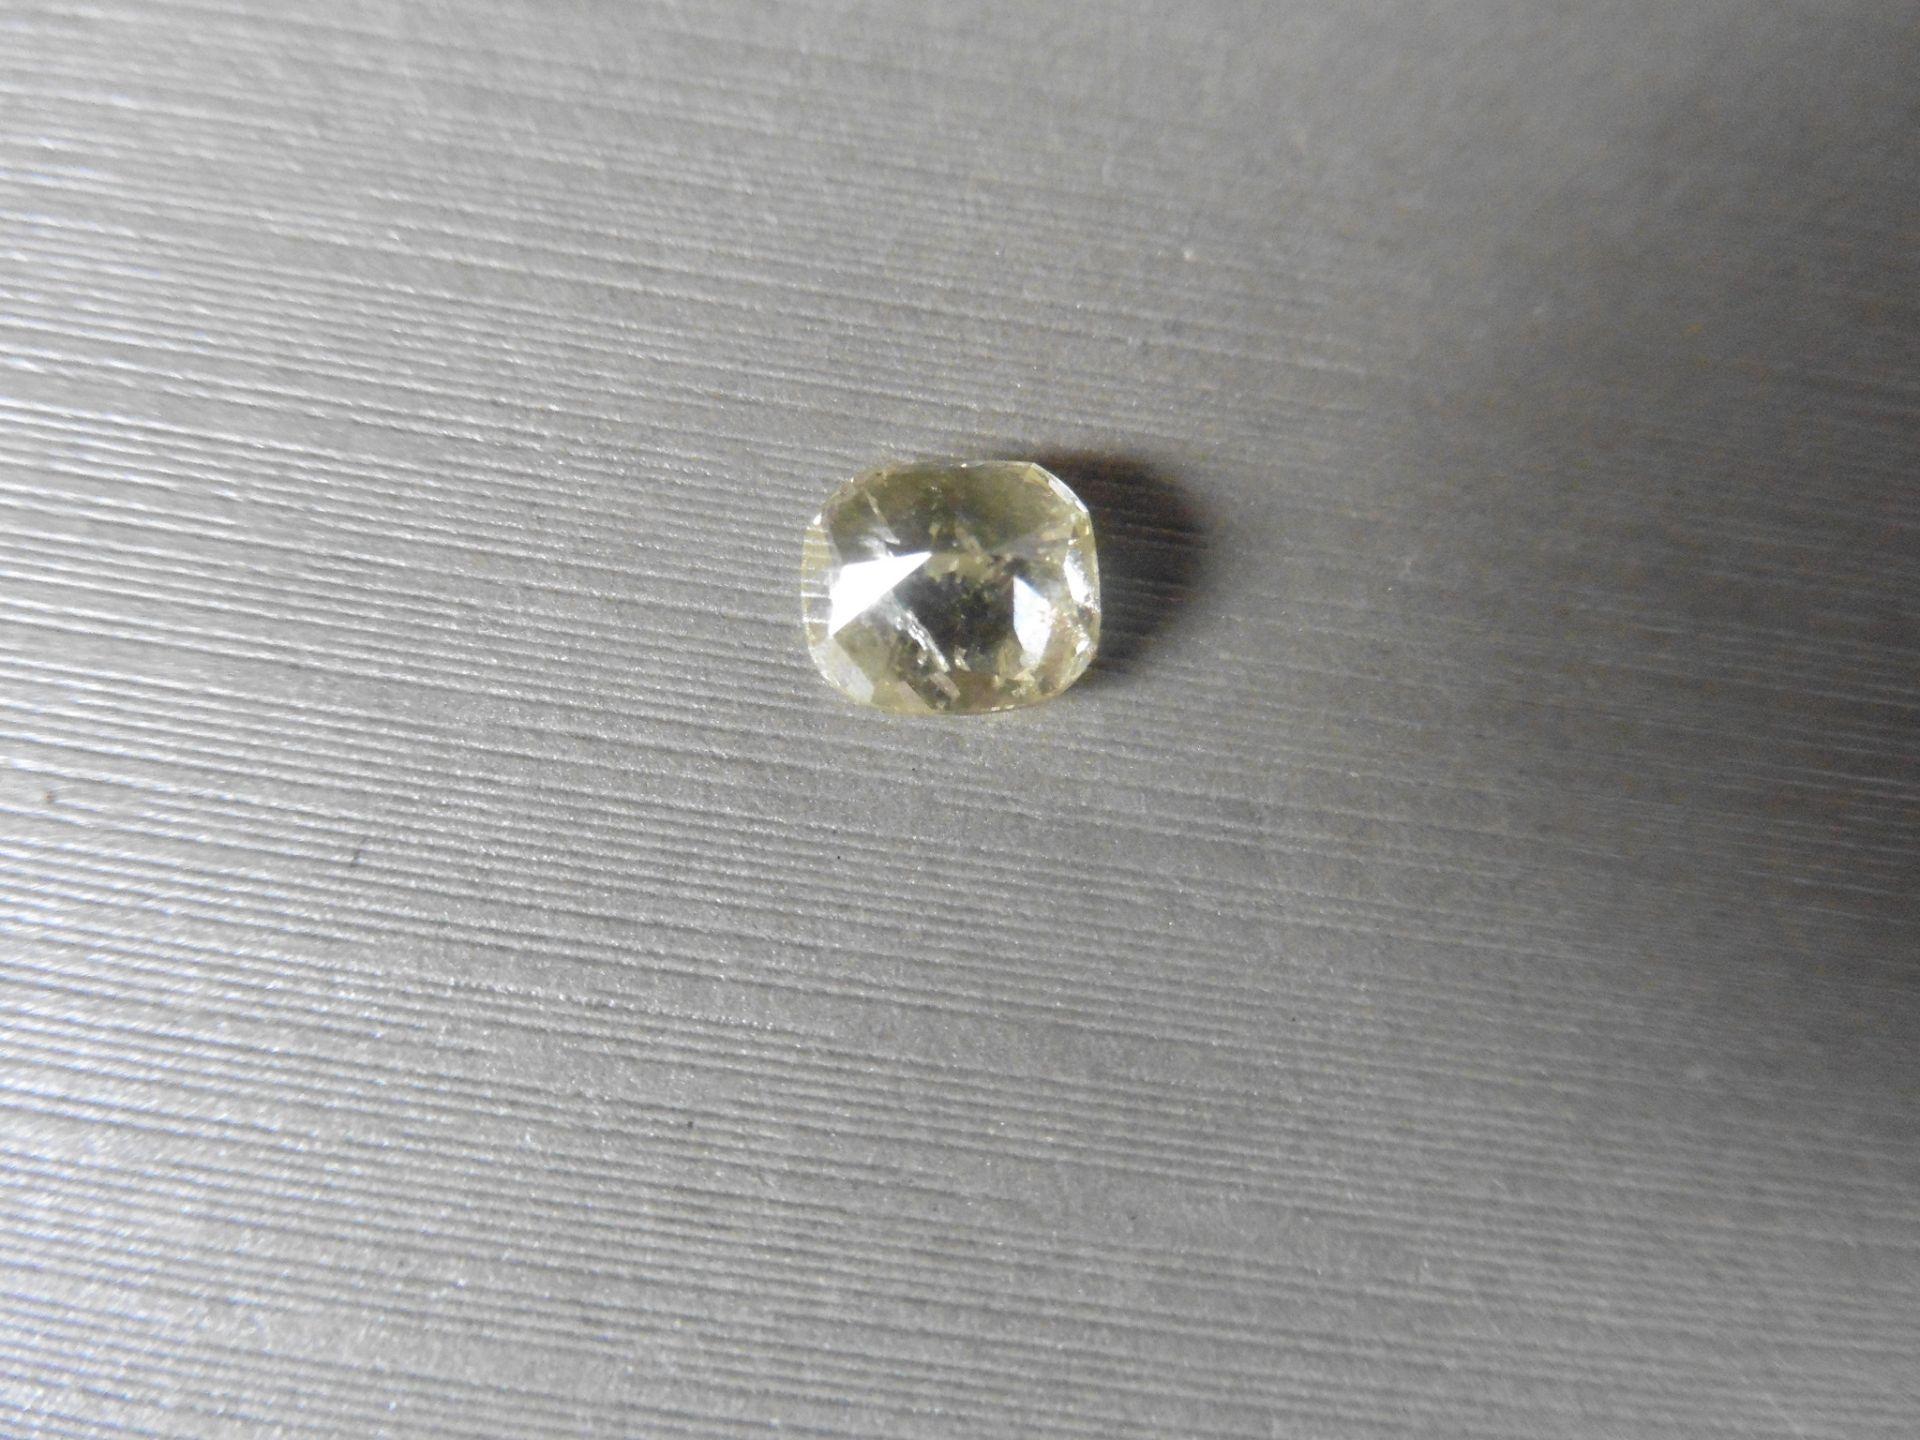 1.57ct loose cushion cut diamond. Fancy yellow colour and I1 clarity. 7.13 x 6.22 x 4.09mm. - Image 3 of 4